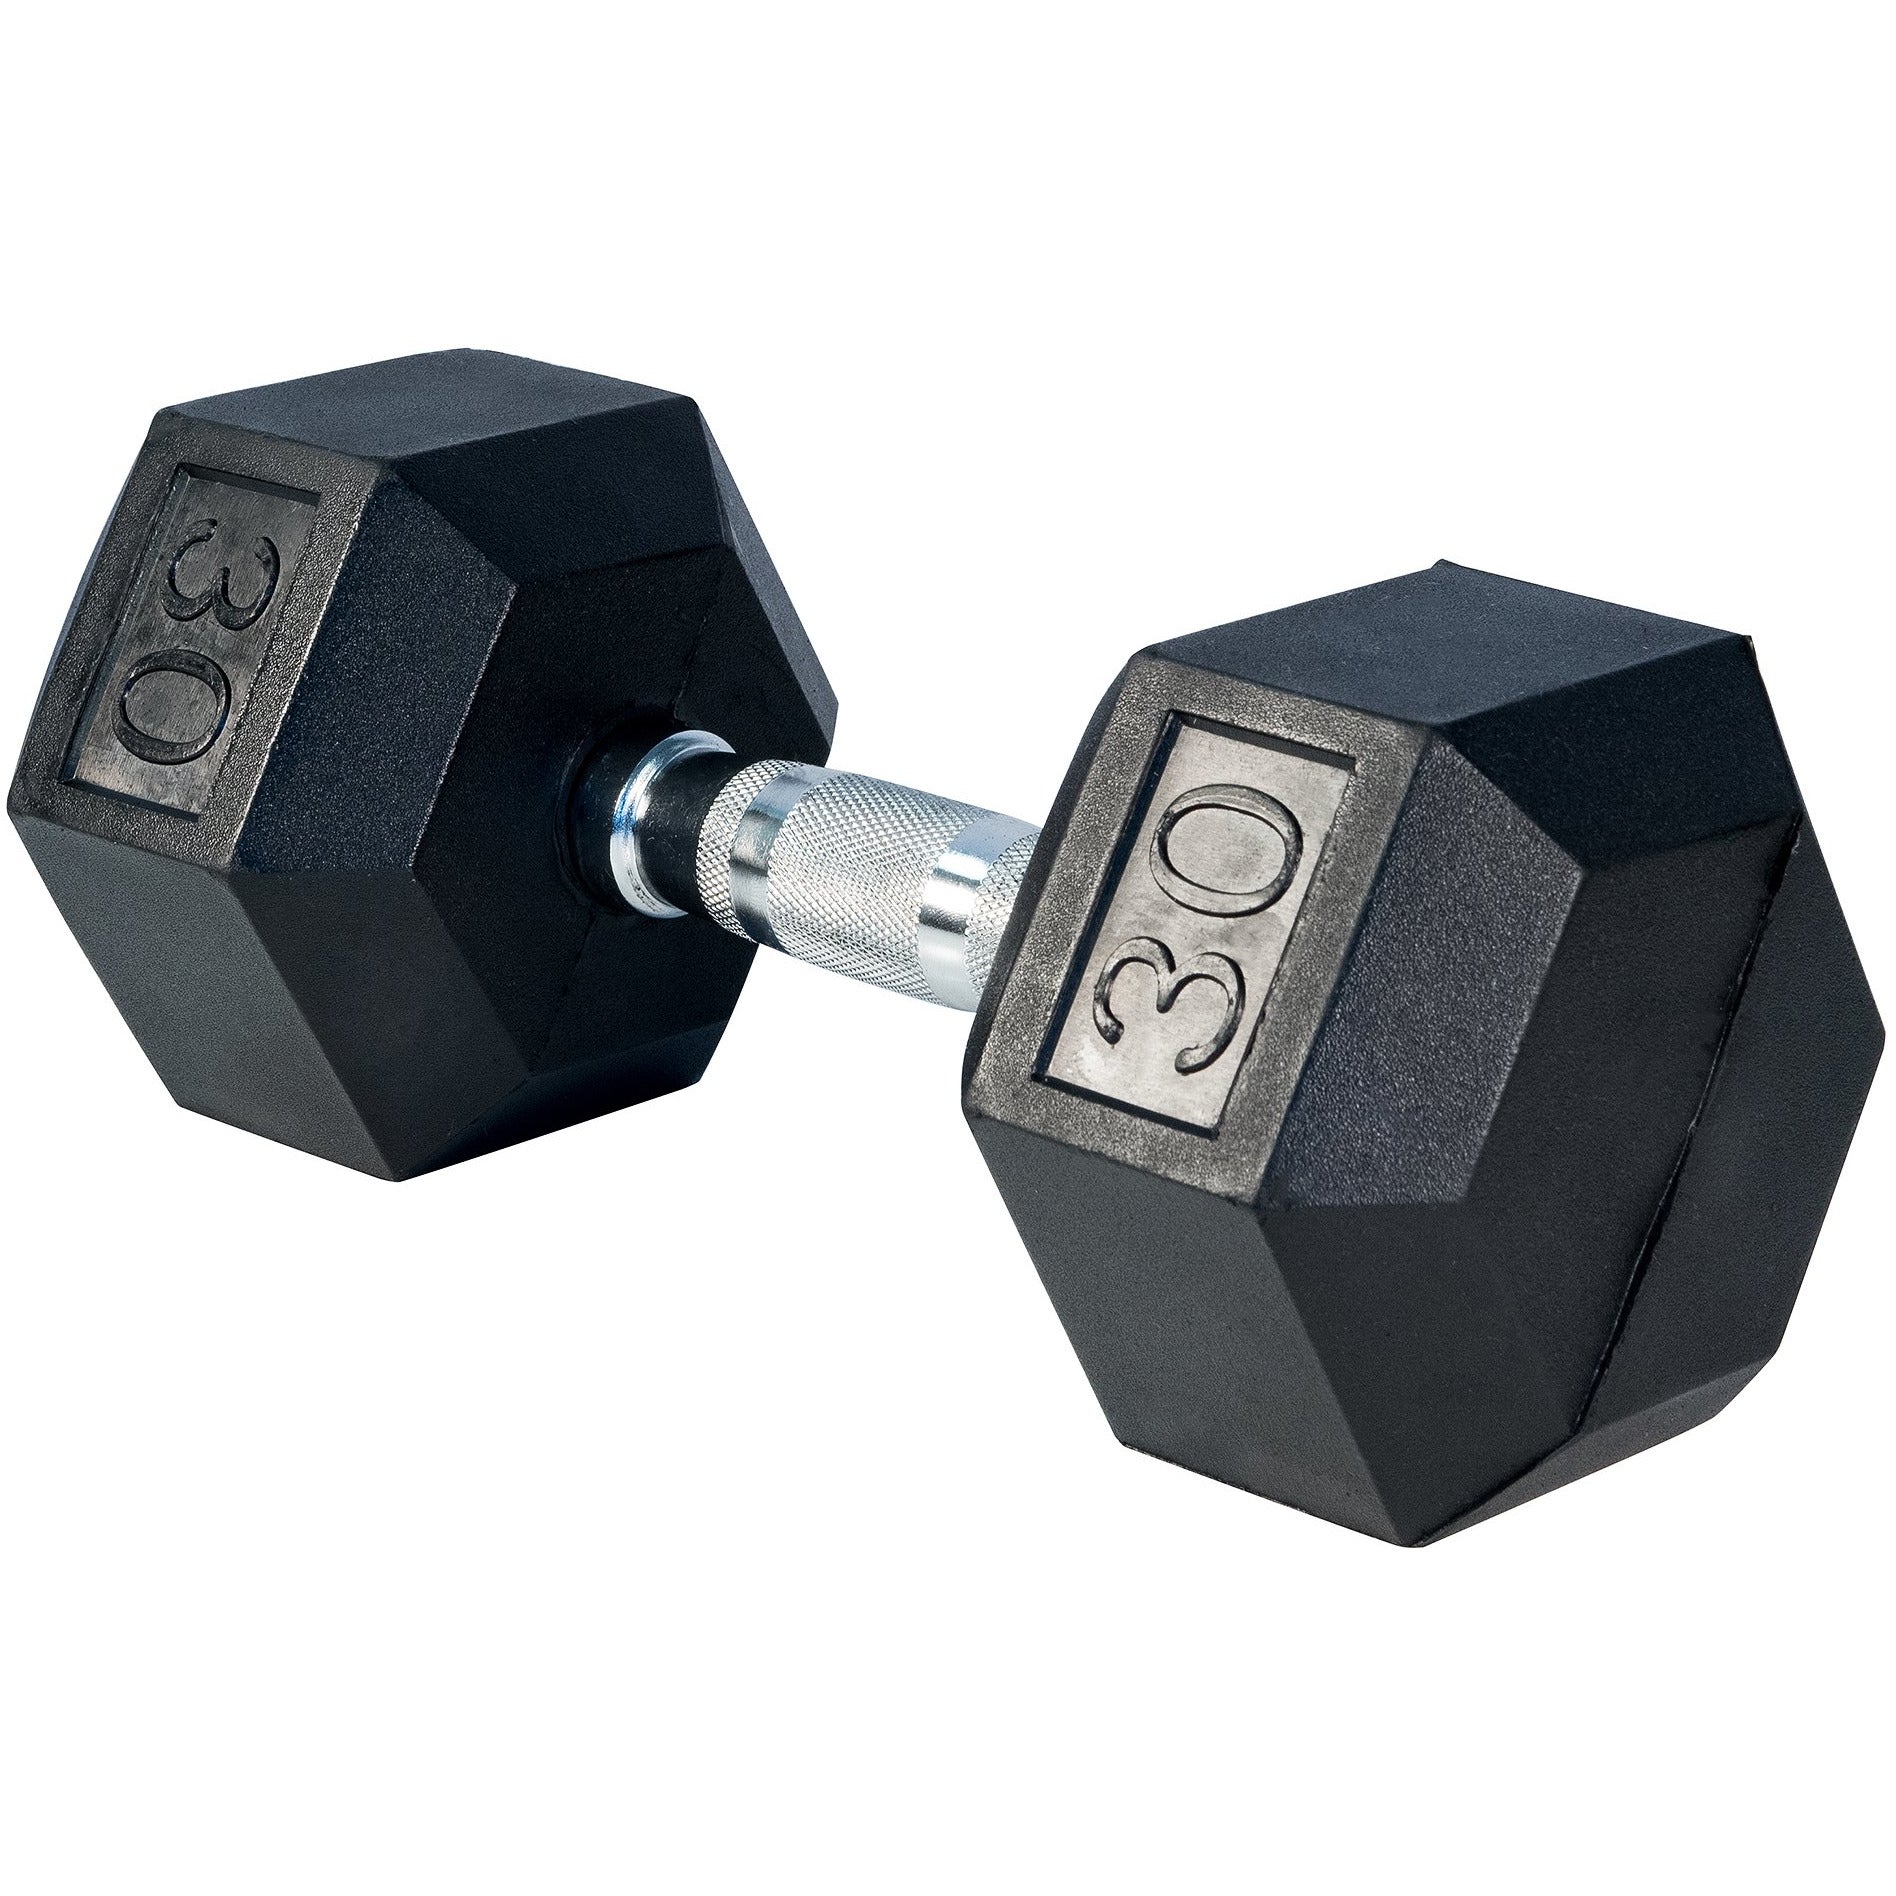 Rubber Hex Dumbells - Ergonomic shape handles (1 PAIR of 2 DUMBBELLS) Fitness Accessories 8lb,1 PAIR of 12lb (NO SHIPPING STORE PICKUP ONLY,15lb (NO SHIPPING STORE PICKUP ONLY),30lb (NO SHIPPING STORE PICKUP ONLY),20lb (NO SHIPPING STORE PICKUP ONLY),25lb (NO SHIPPING STORE PICKUP ONLY),35lb (NO SHIPPING STORE PICKUP ONLY),40lb (NO SHIPPING STORE PICKUP ONLY) ATF Sports